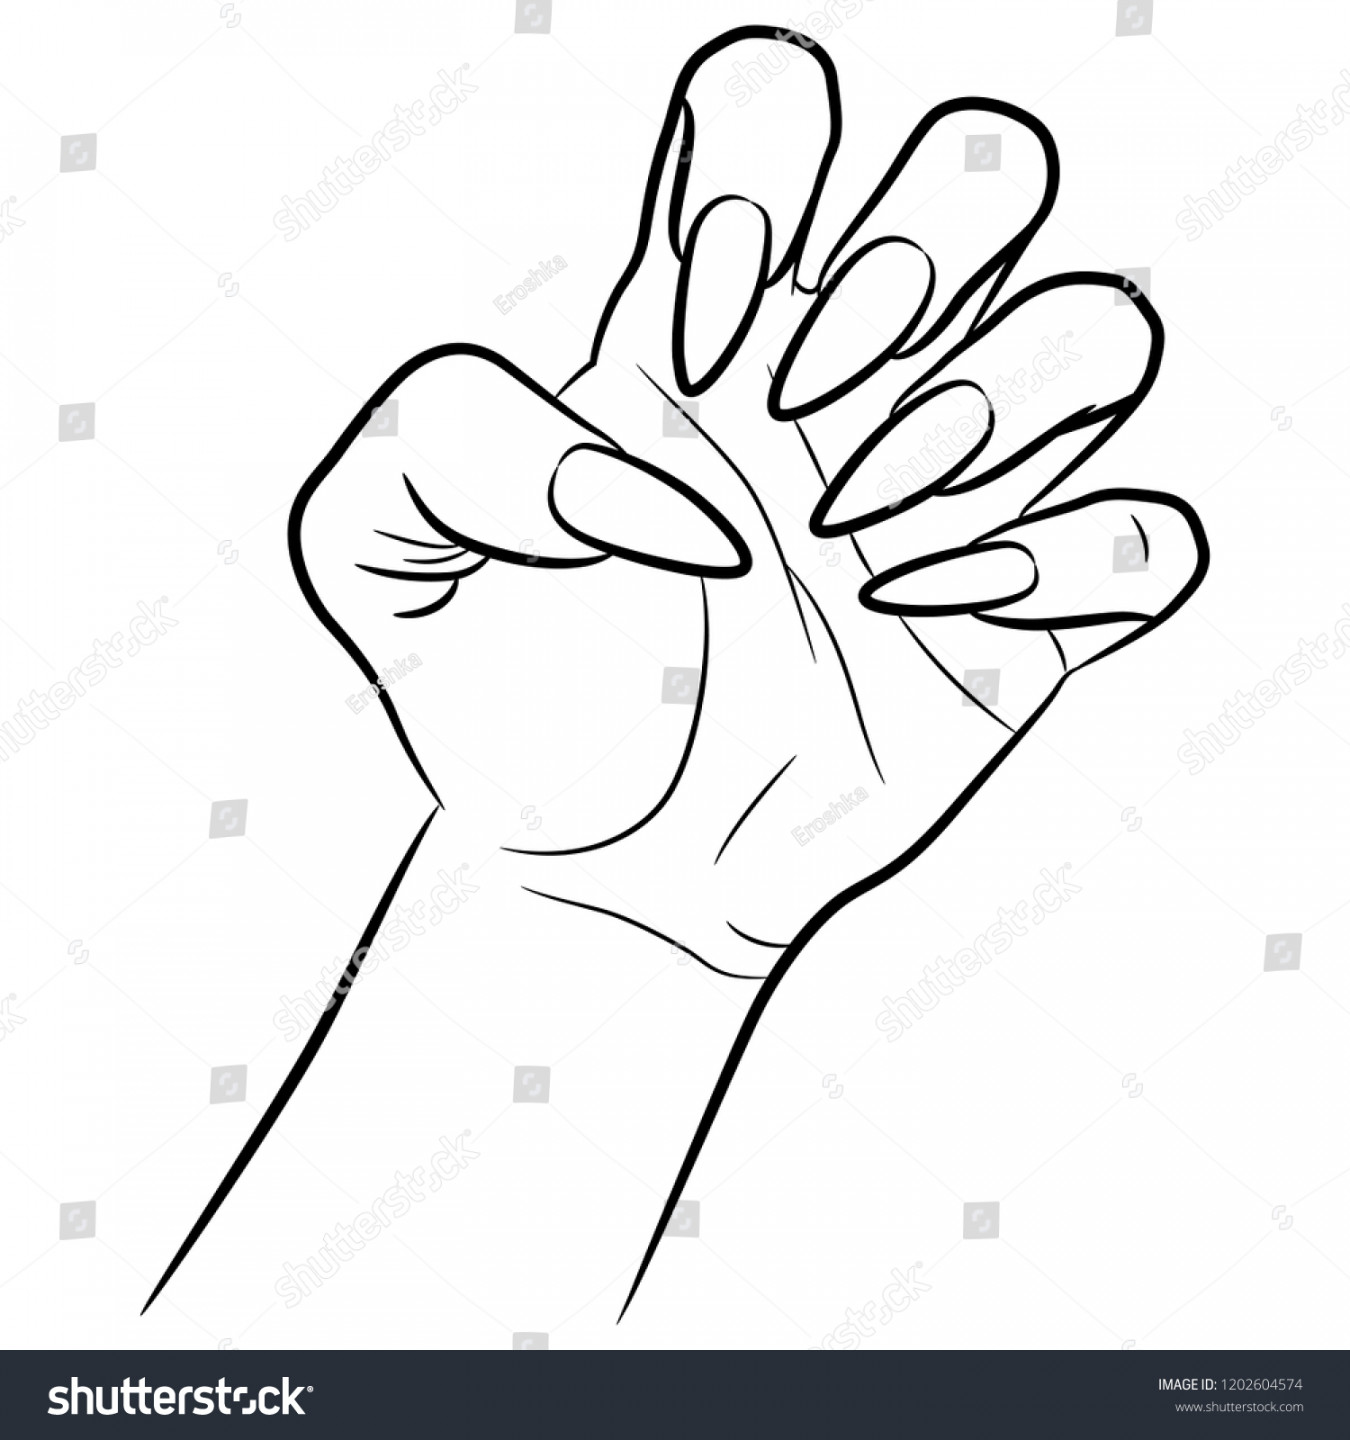 Isolated Vector Illustration Human Hand Clenched: Stock